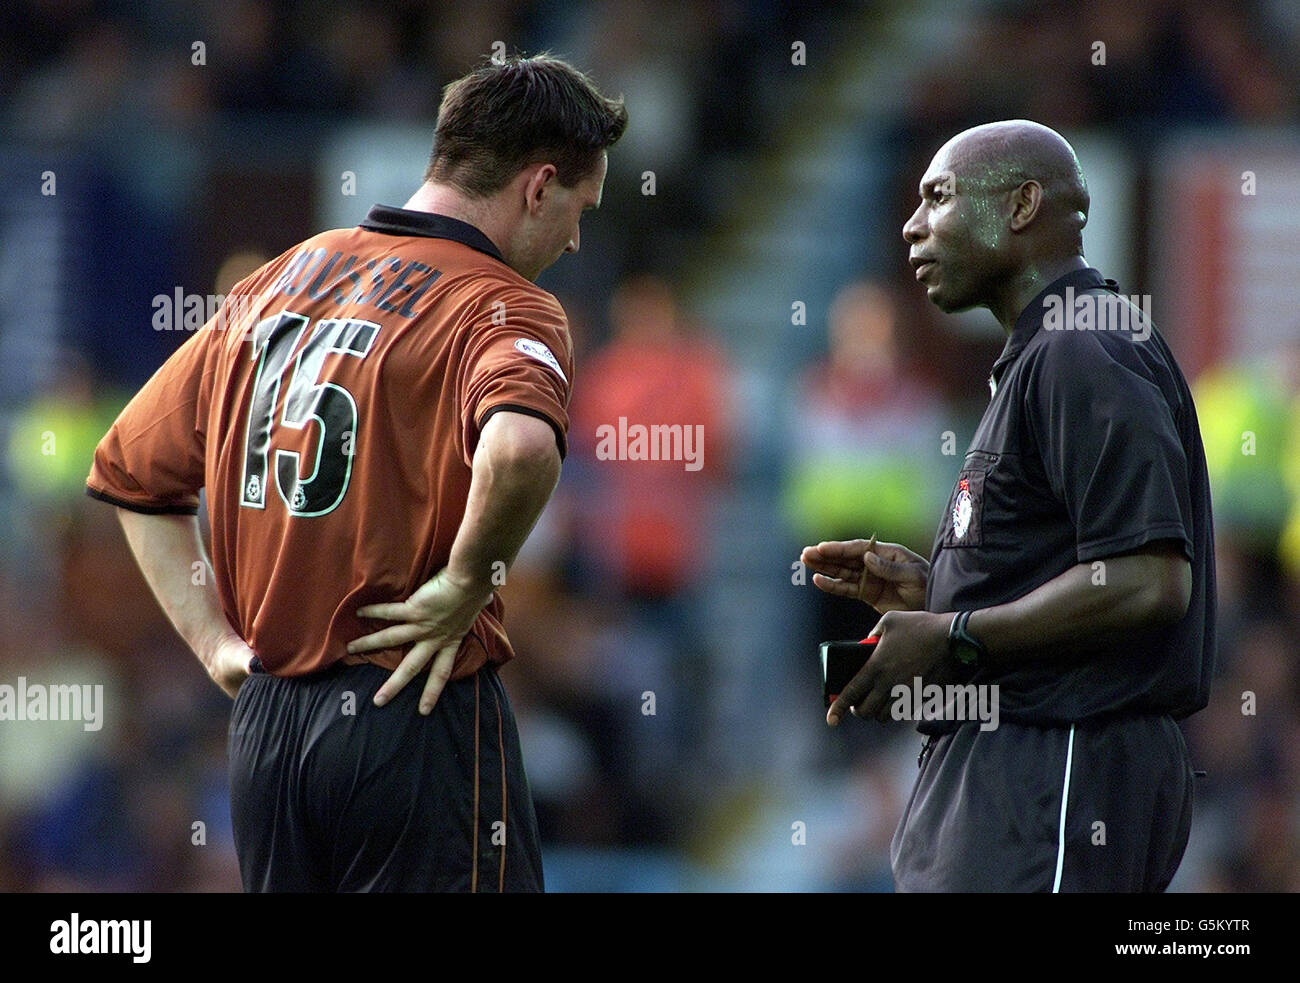 Referee Uriah Rennie cautions Cedric Roussel, during the match against Coventry at Highfield Road in the Nationwide League Division One. NO UNOFFICIAL CLUB WEBSITE USE. Stock Photo